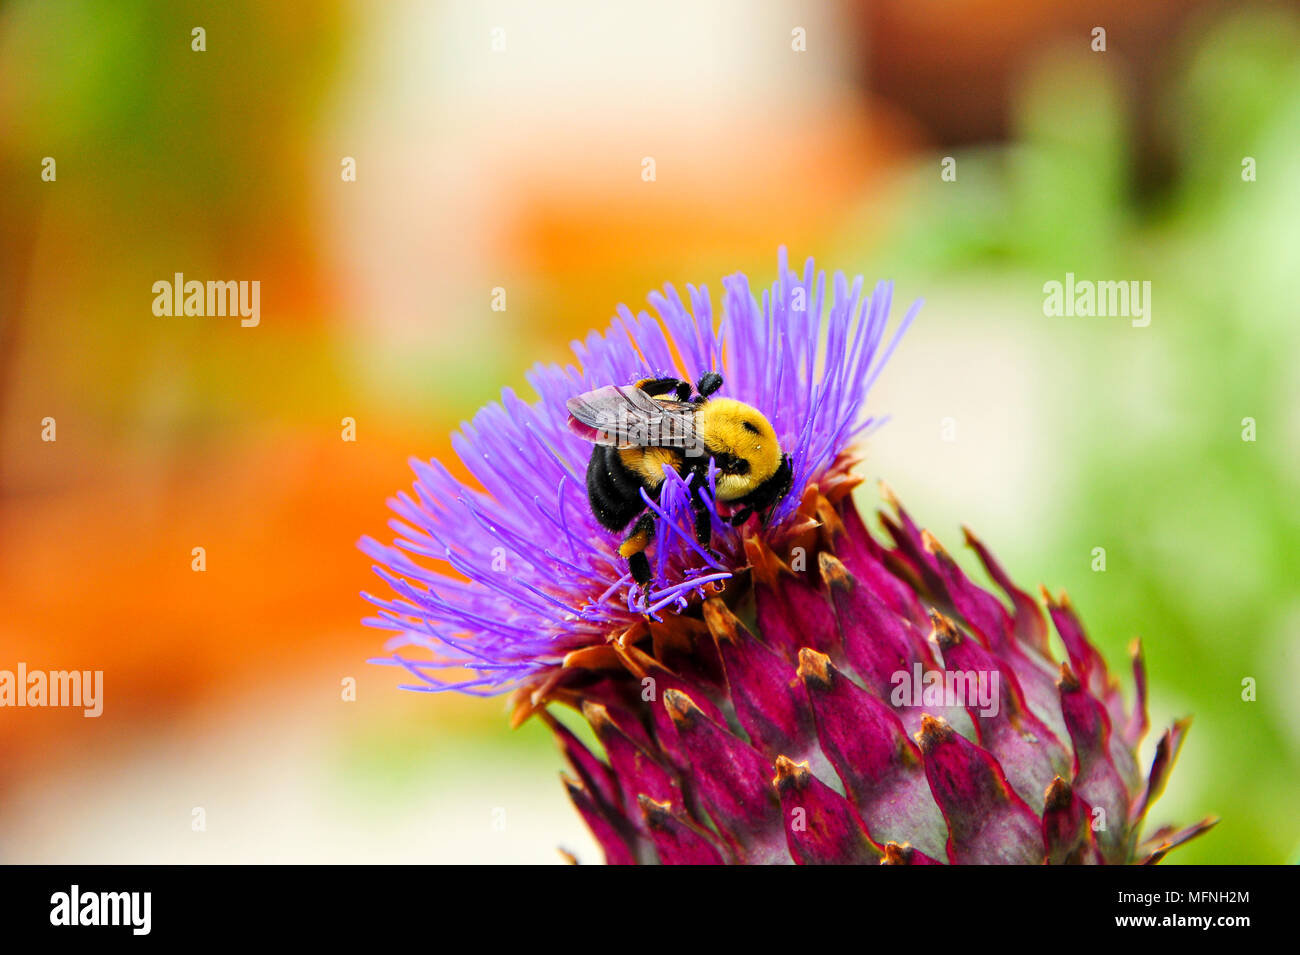 Close up of a bumble bee collecting pollen from a Purple cardoon flower (Cynara cadunculus) Stock Photo